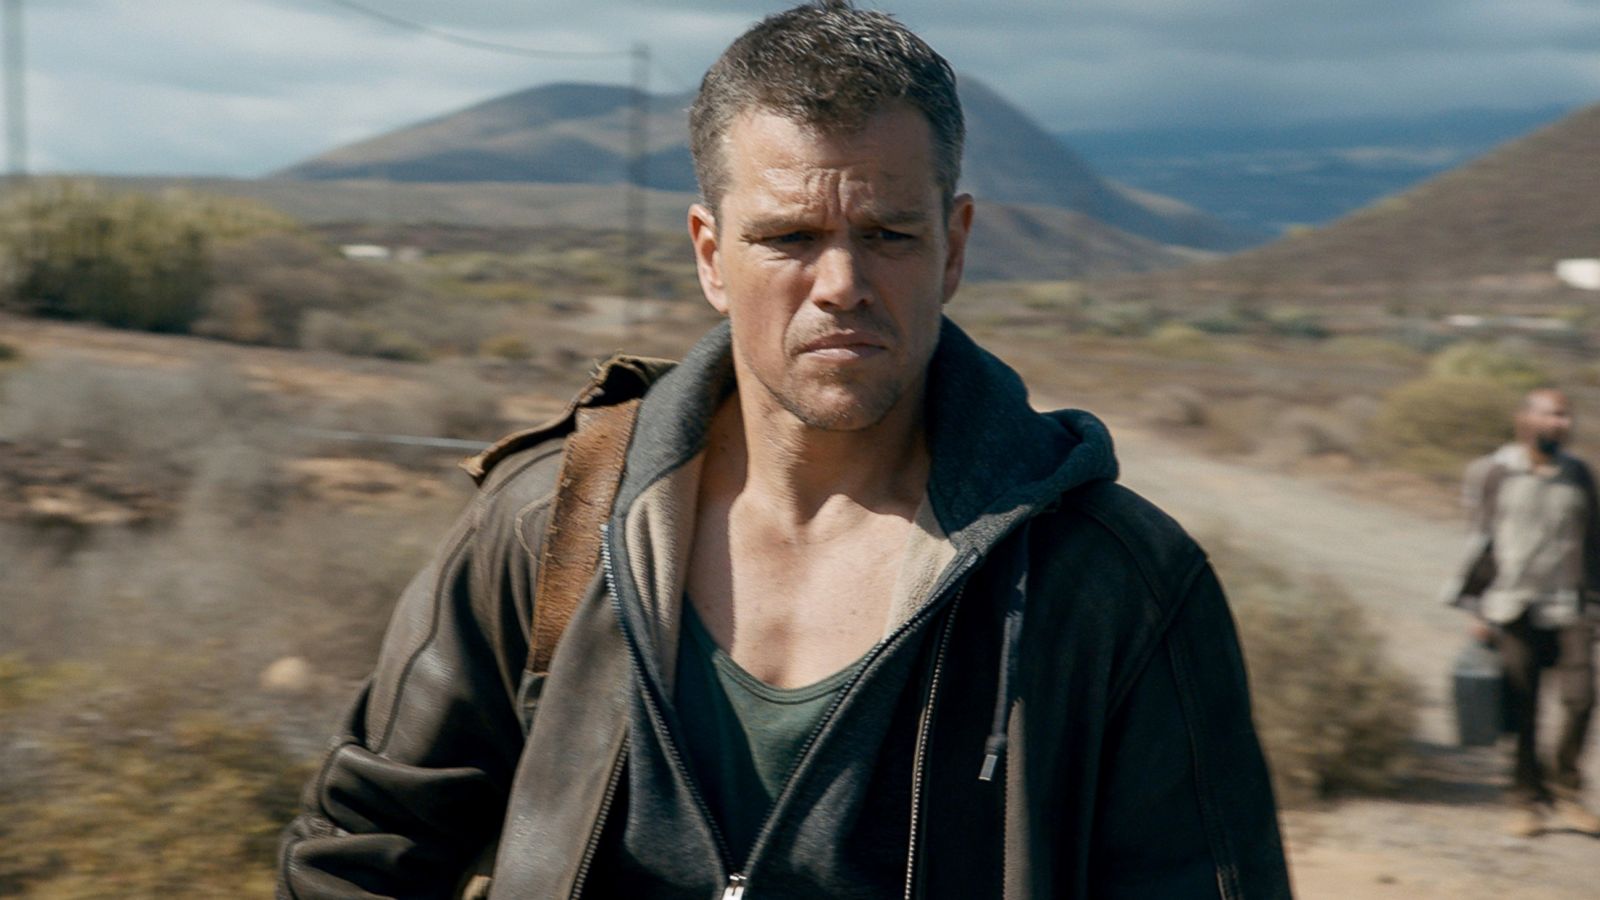 Jason Bourne': 10 Burning Questions Answered